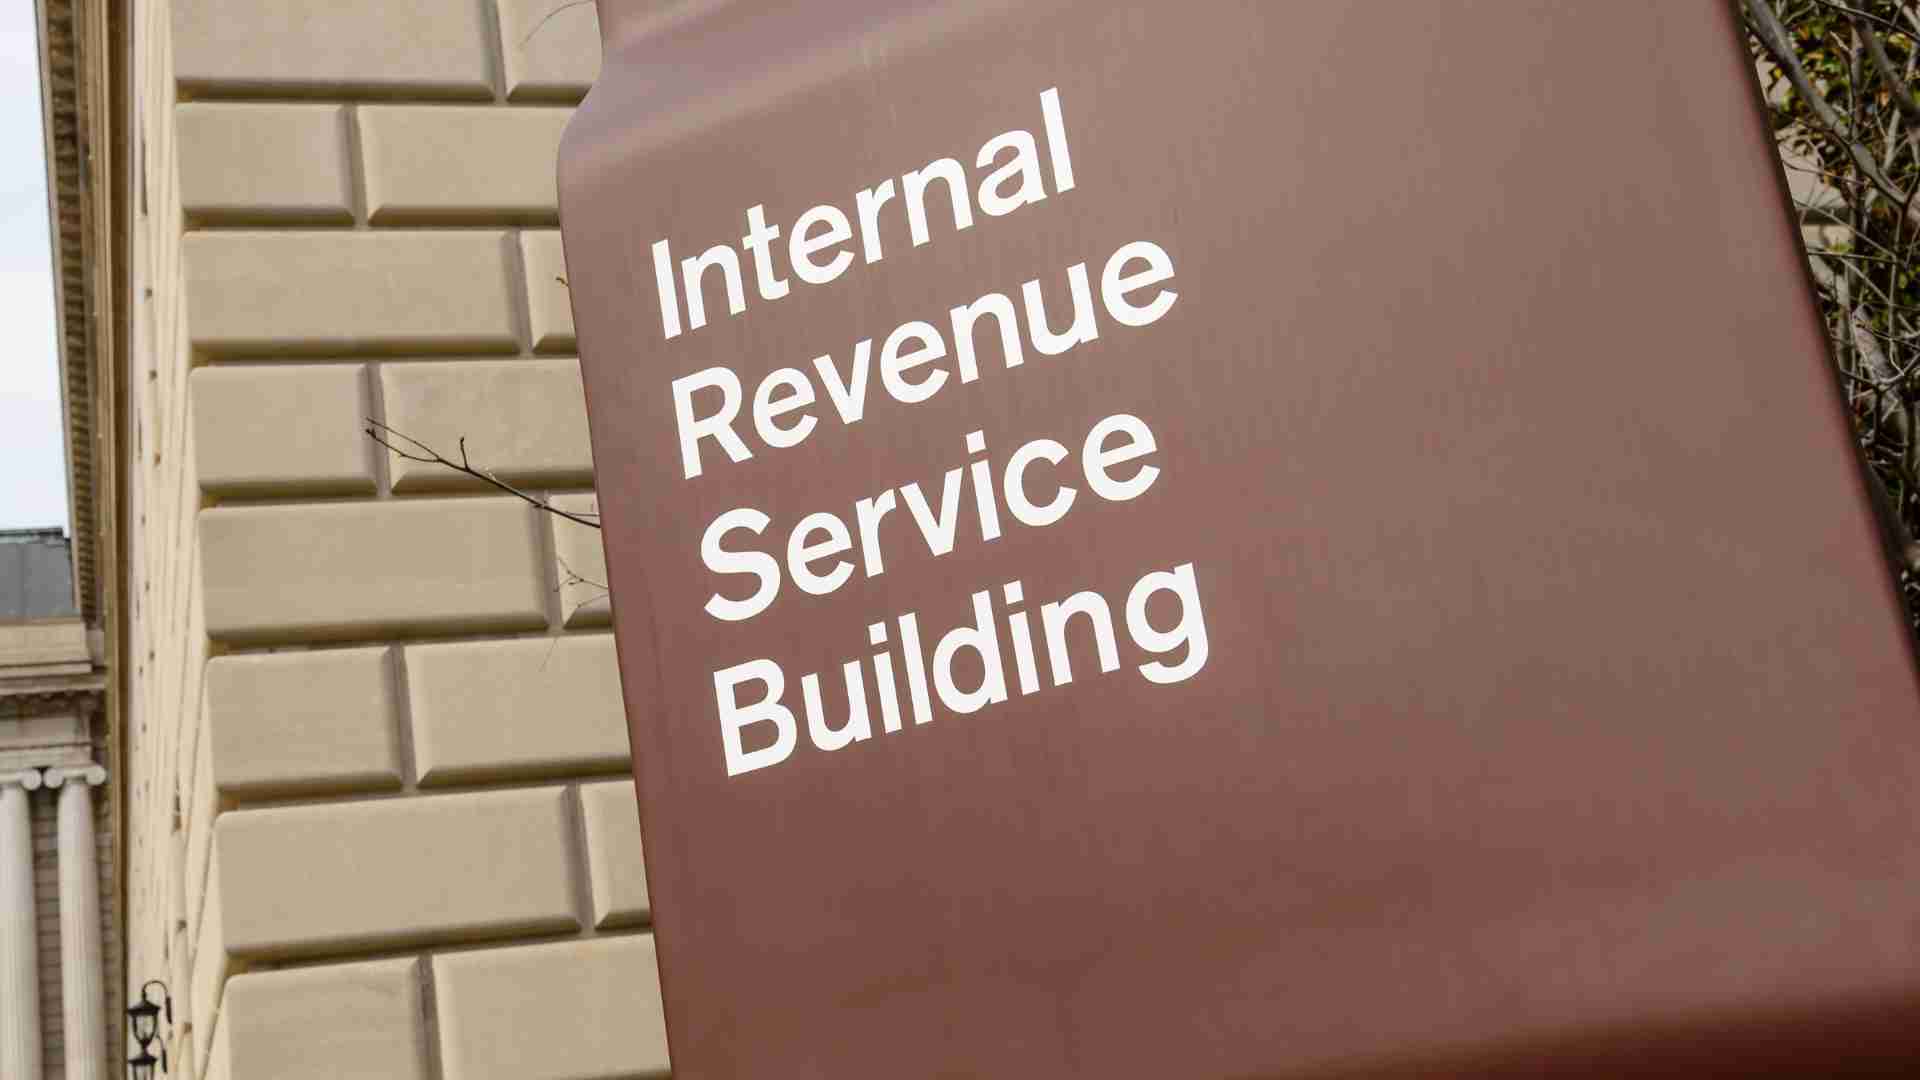 IRS update: The Internal Revenue Service reminds taxpayers of what is going on today if they want a 2023 tax refund quickly